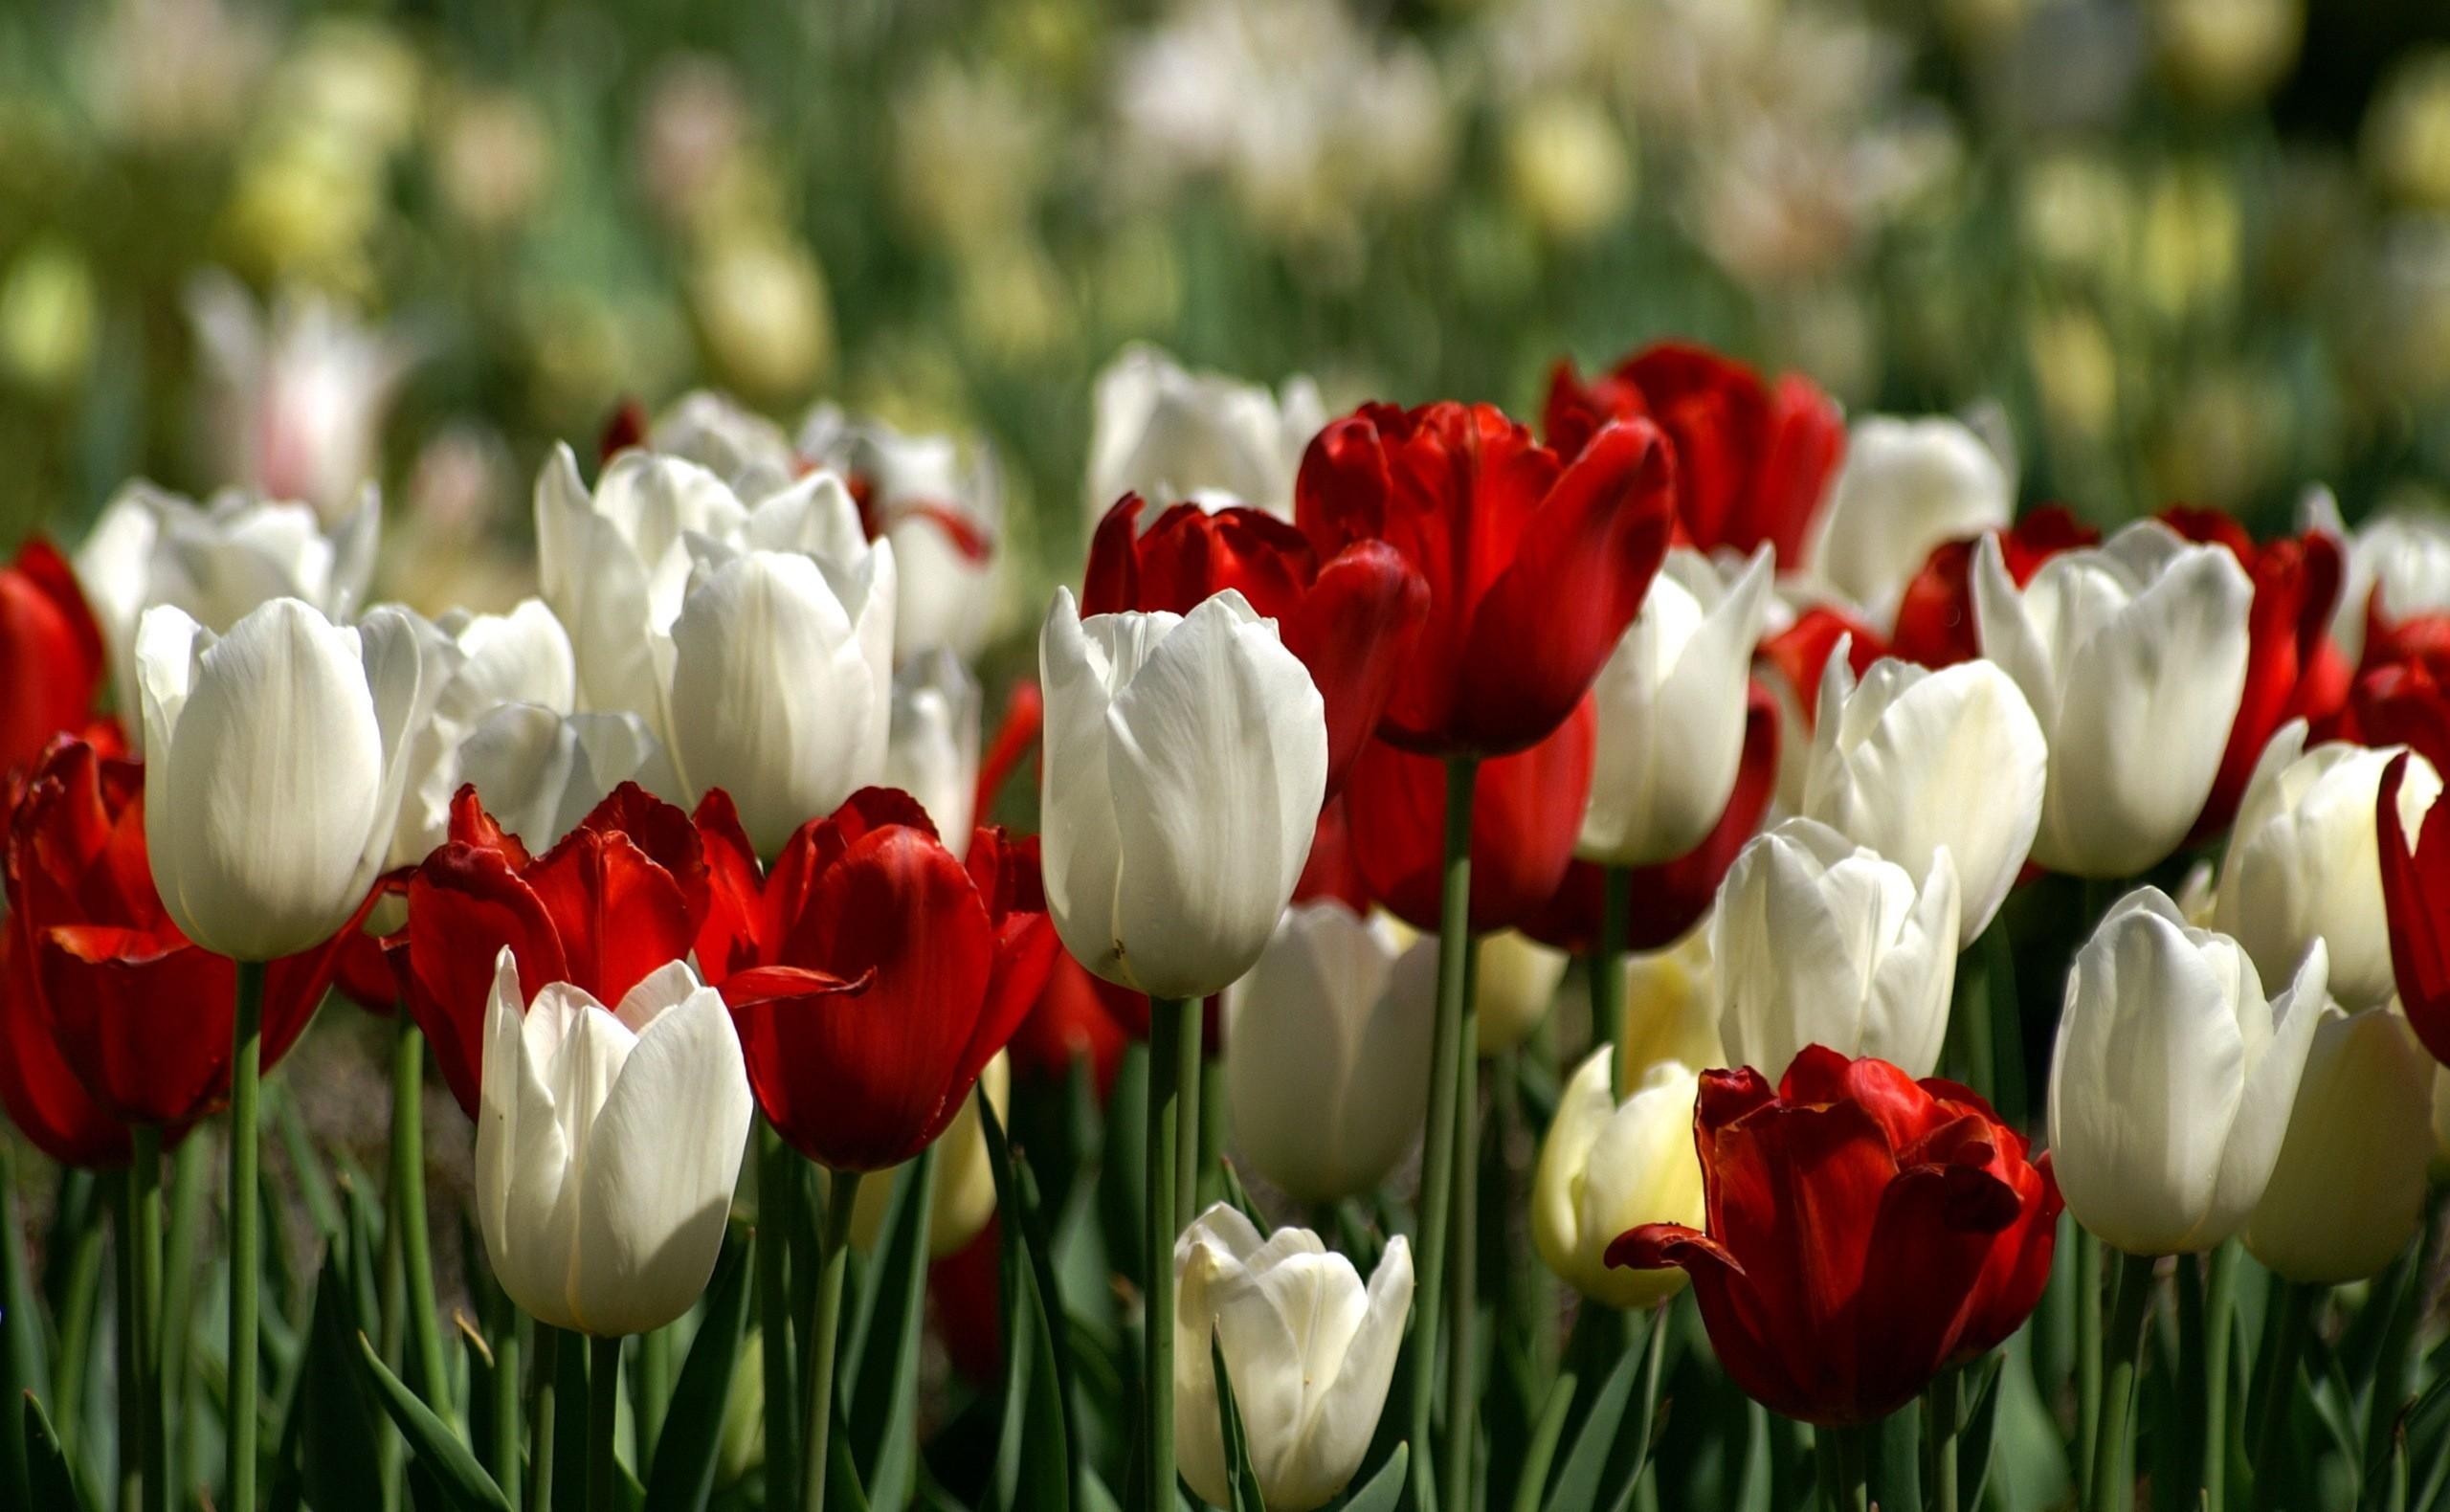 tulips, flowerbed, flowers, white, red, flower bed, spring